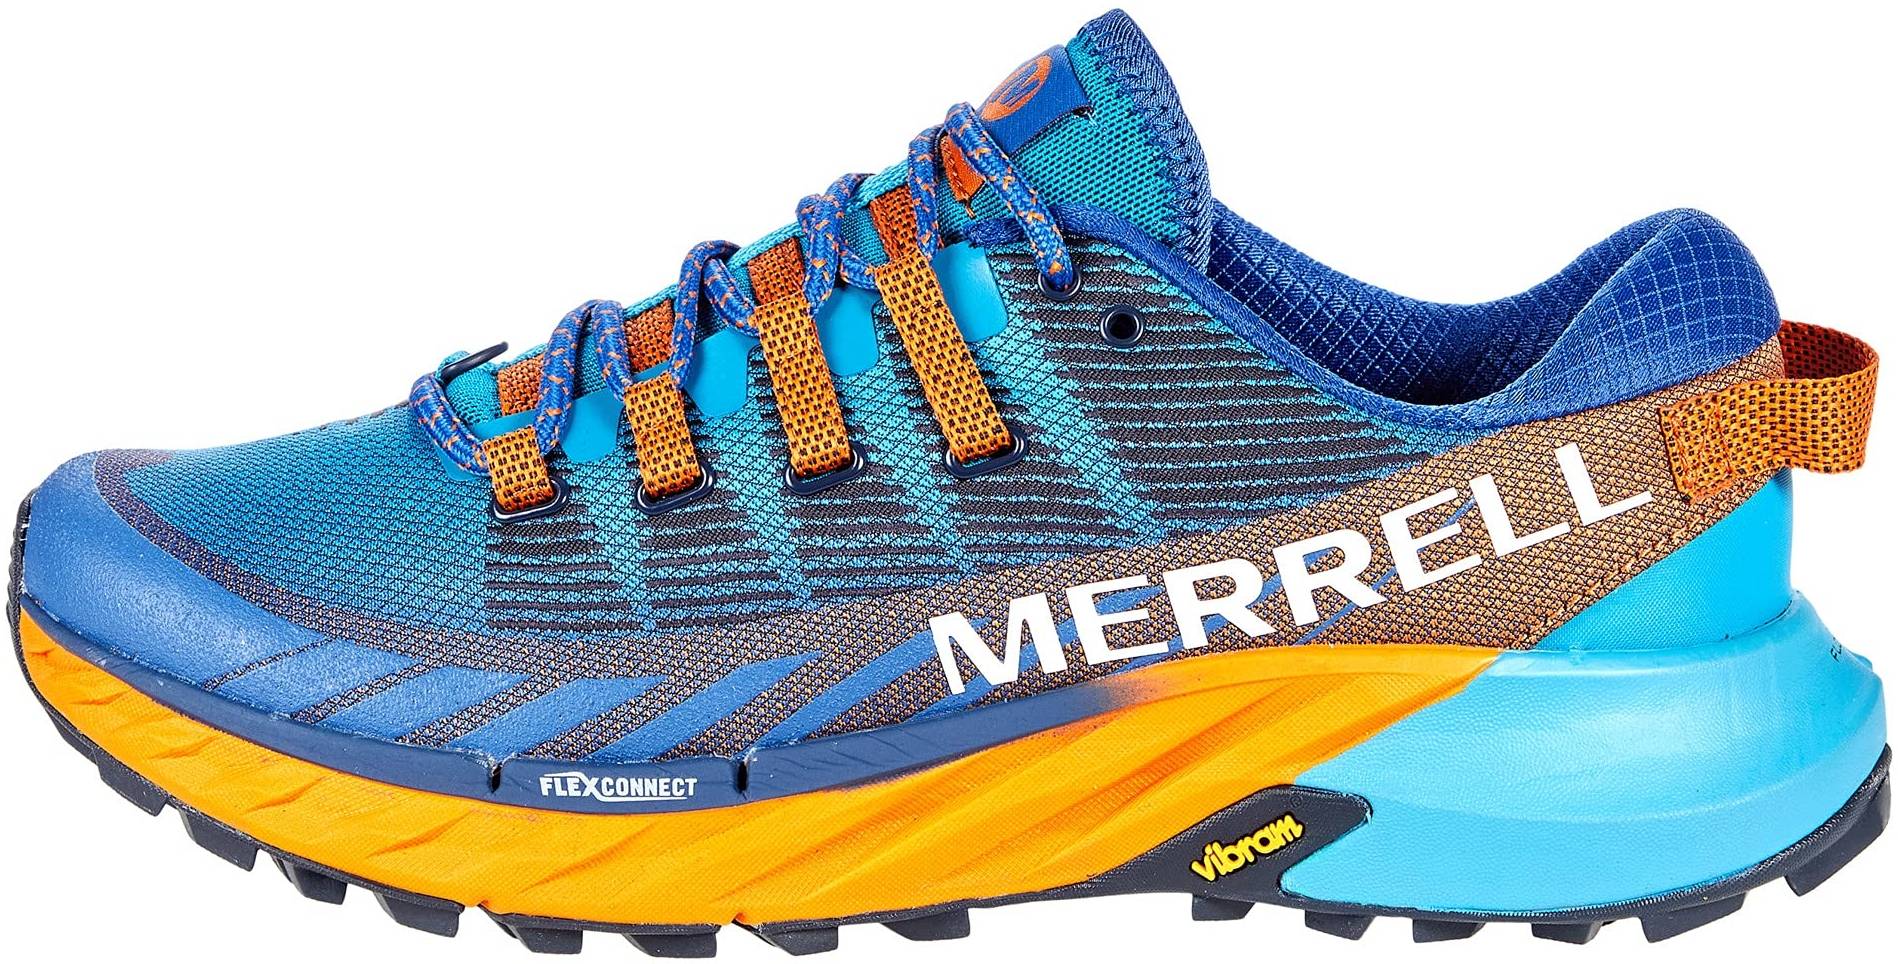 Merrell Mens Agility Peak 4 Trail Running Shoes Trainers Sneakers Blue Sports 